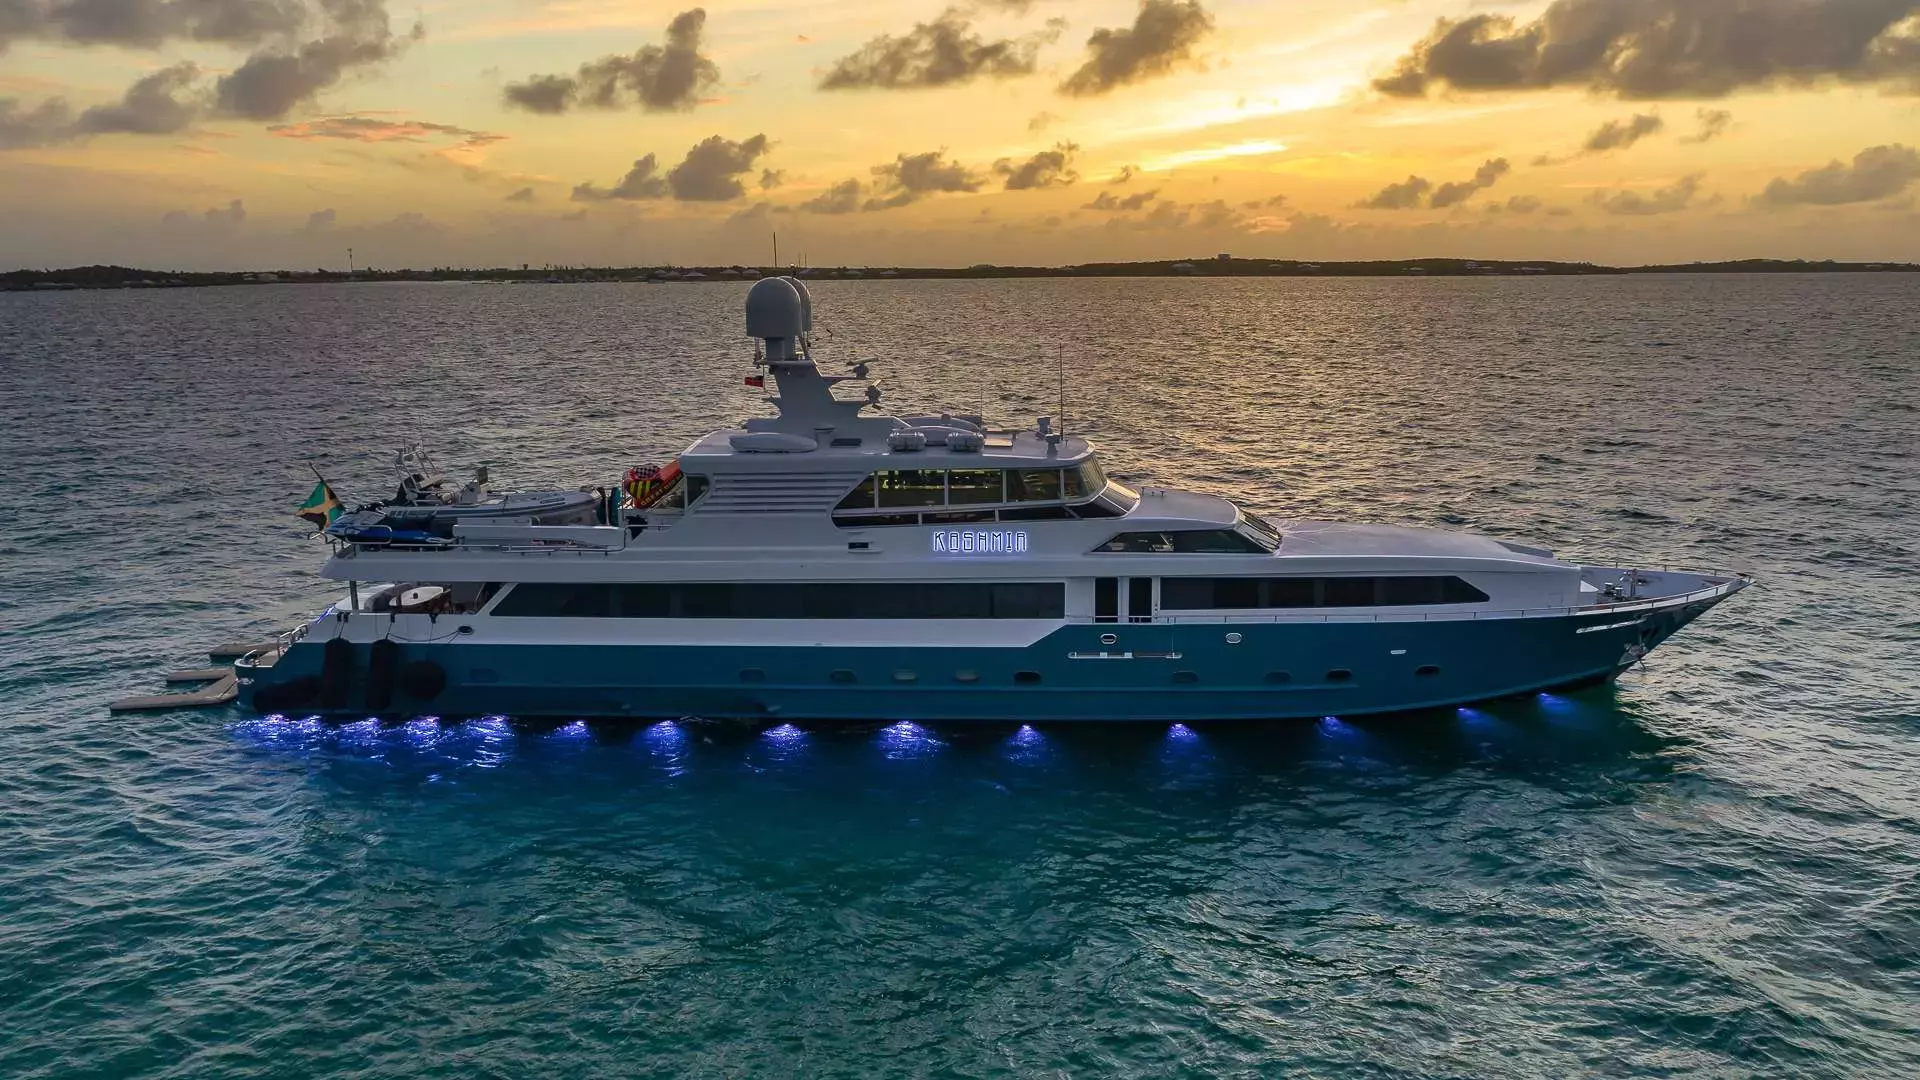 Kashmir by Splendor - Top rates for a Charter of a private Superyacht in Bahamas